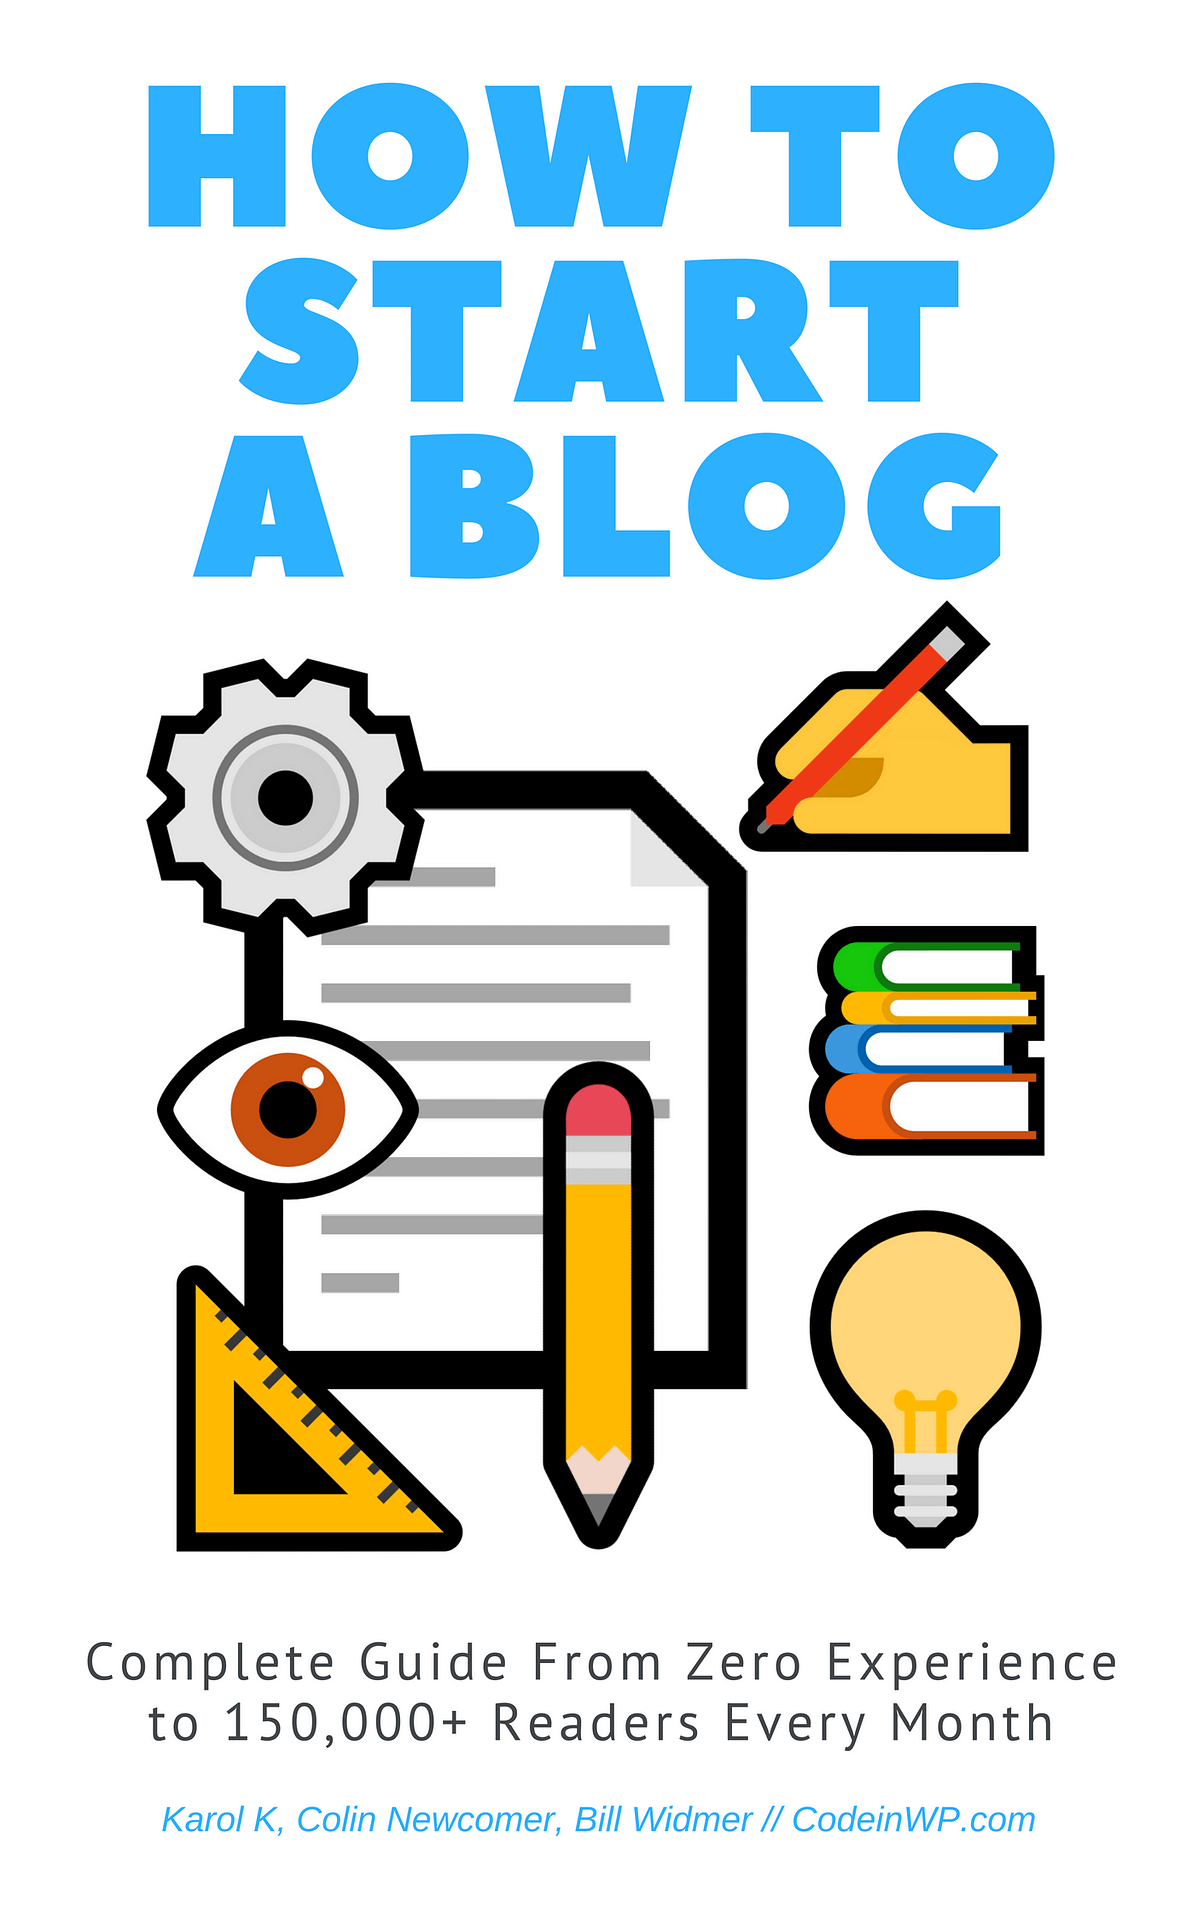 Free Ebook] How to Start a Blog: Complete Guide From Zero